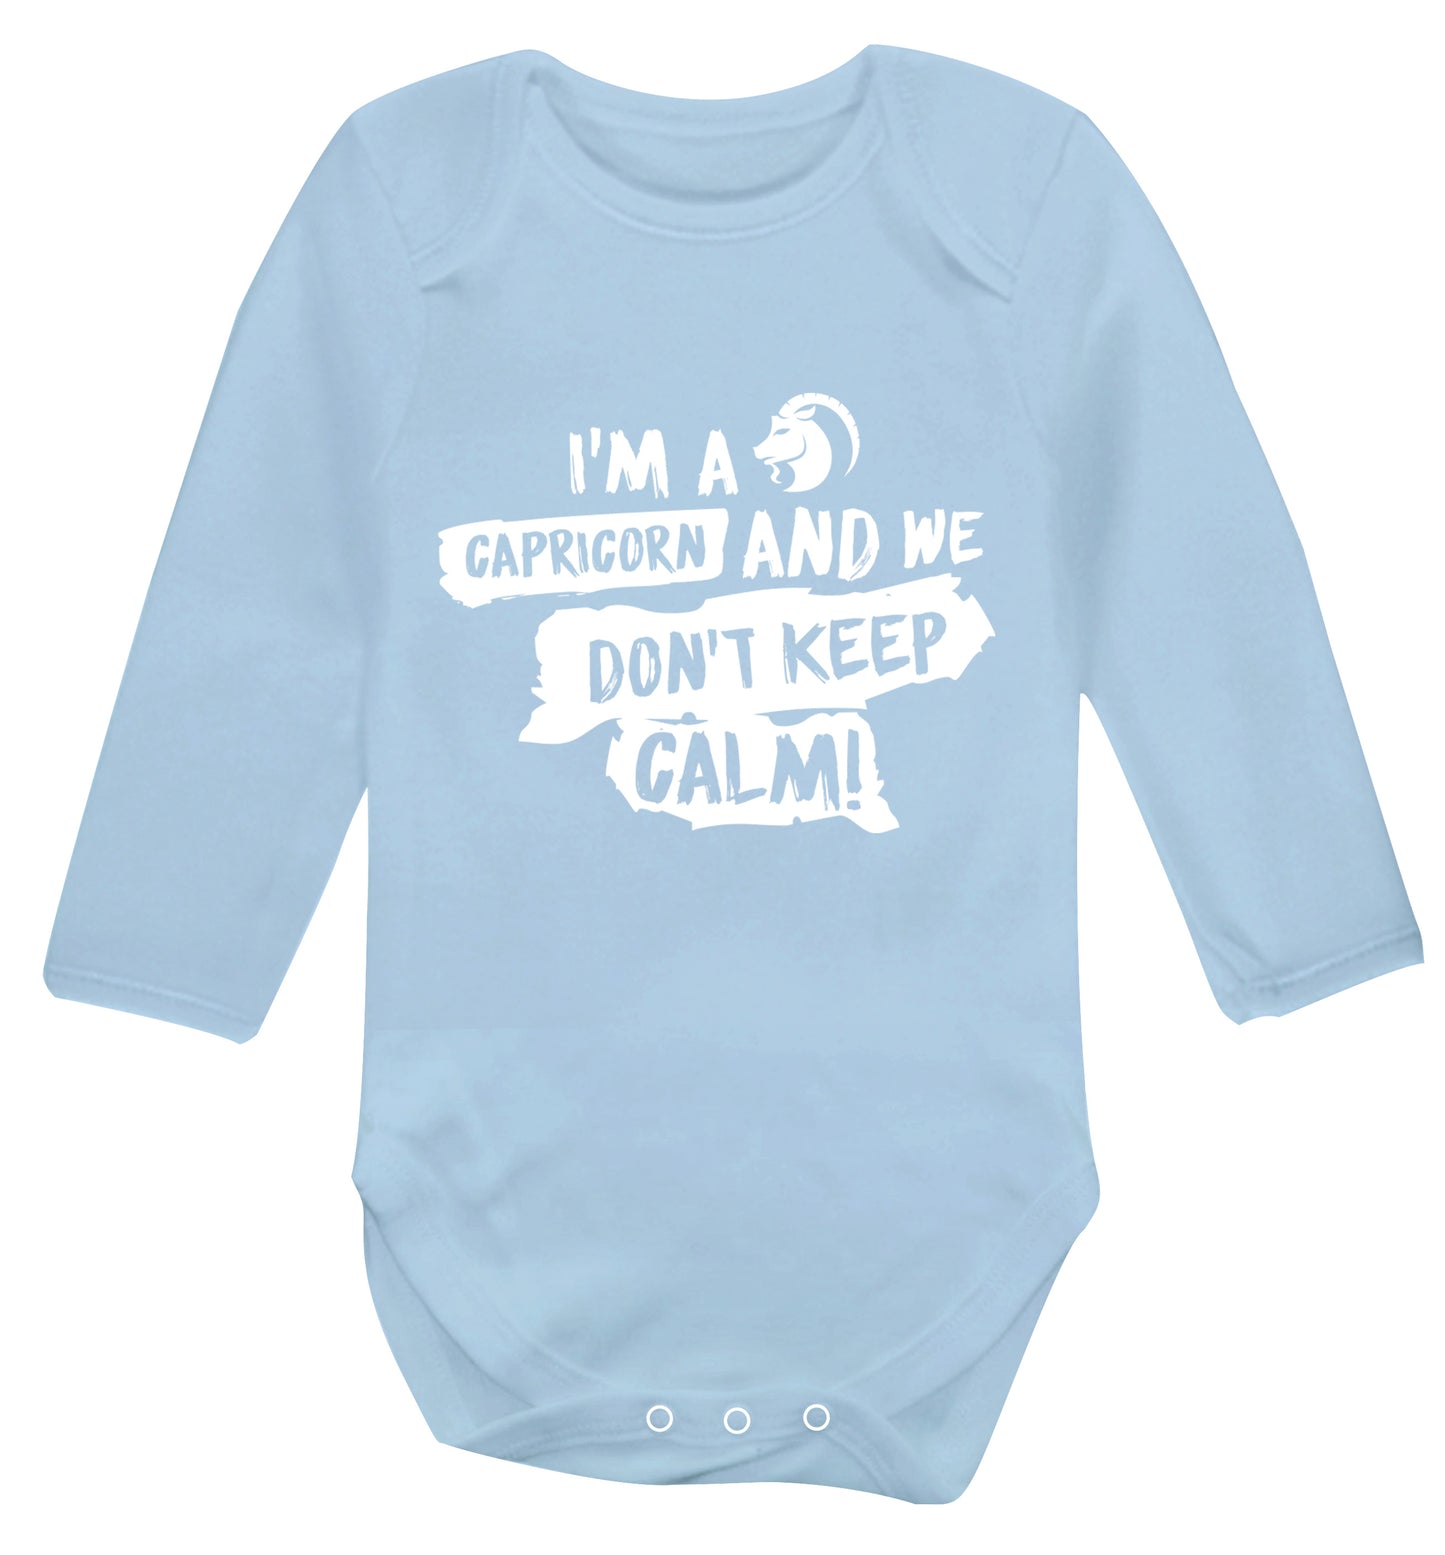 I'm a capricorn and we don't keep calm Baby Vest long sleeved pale blue 6-12 months